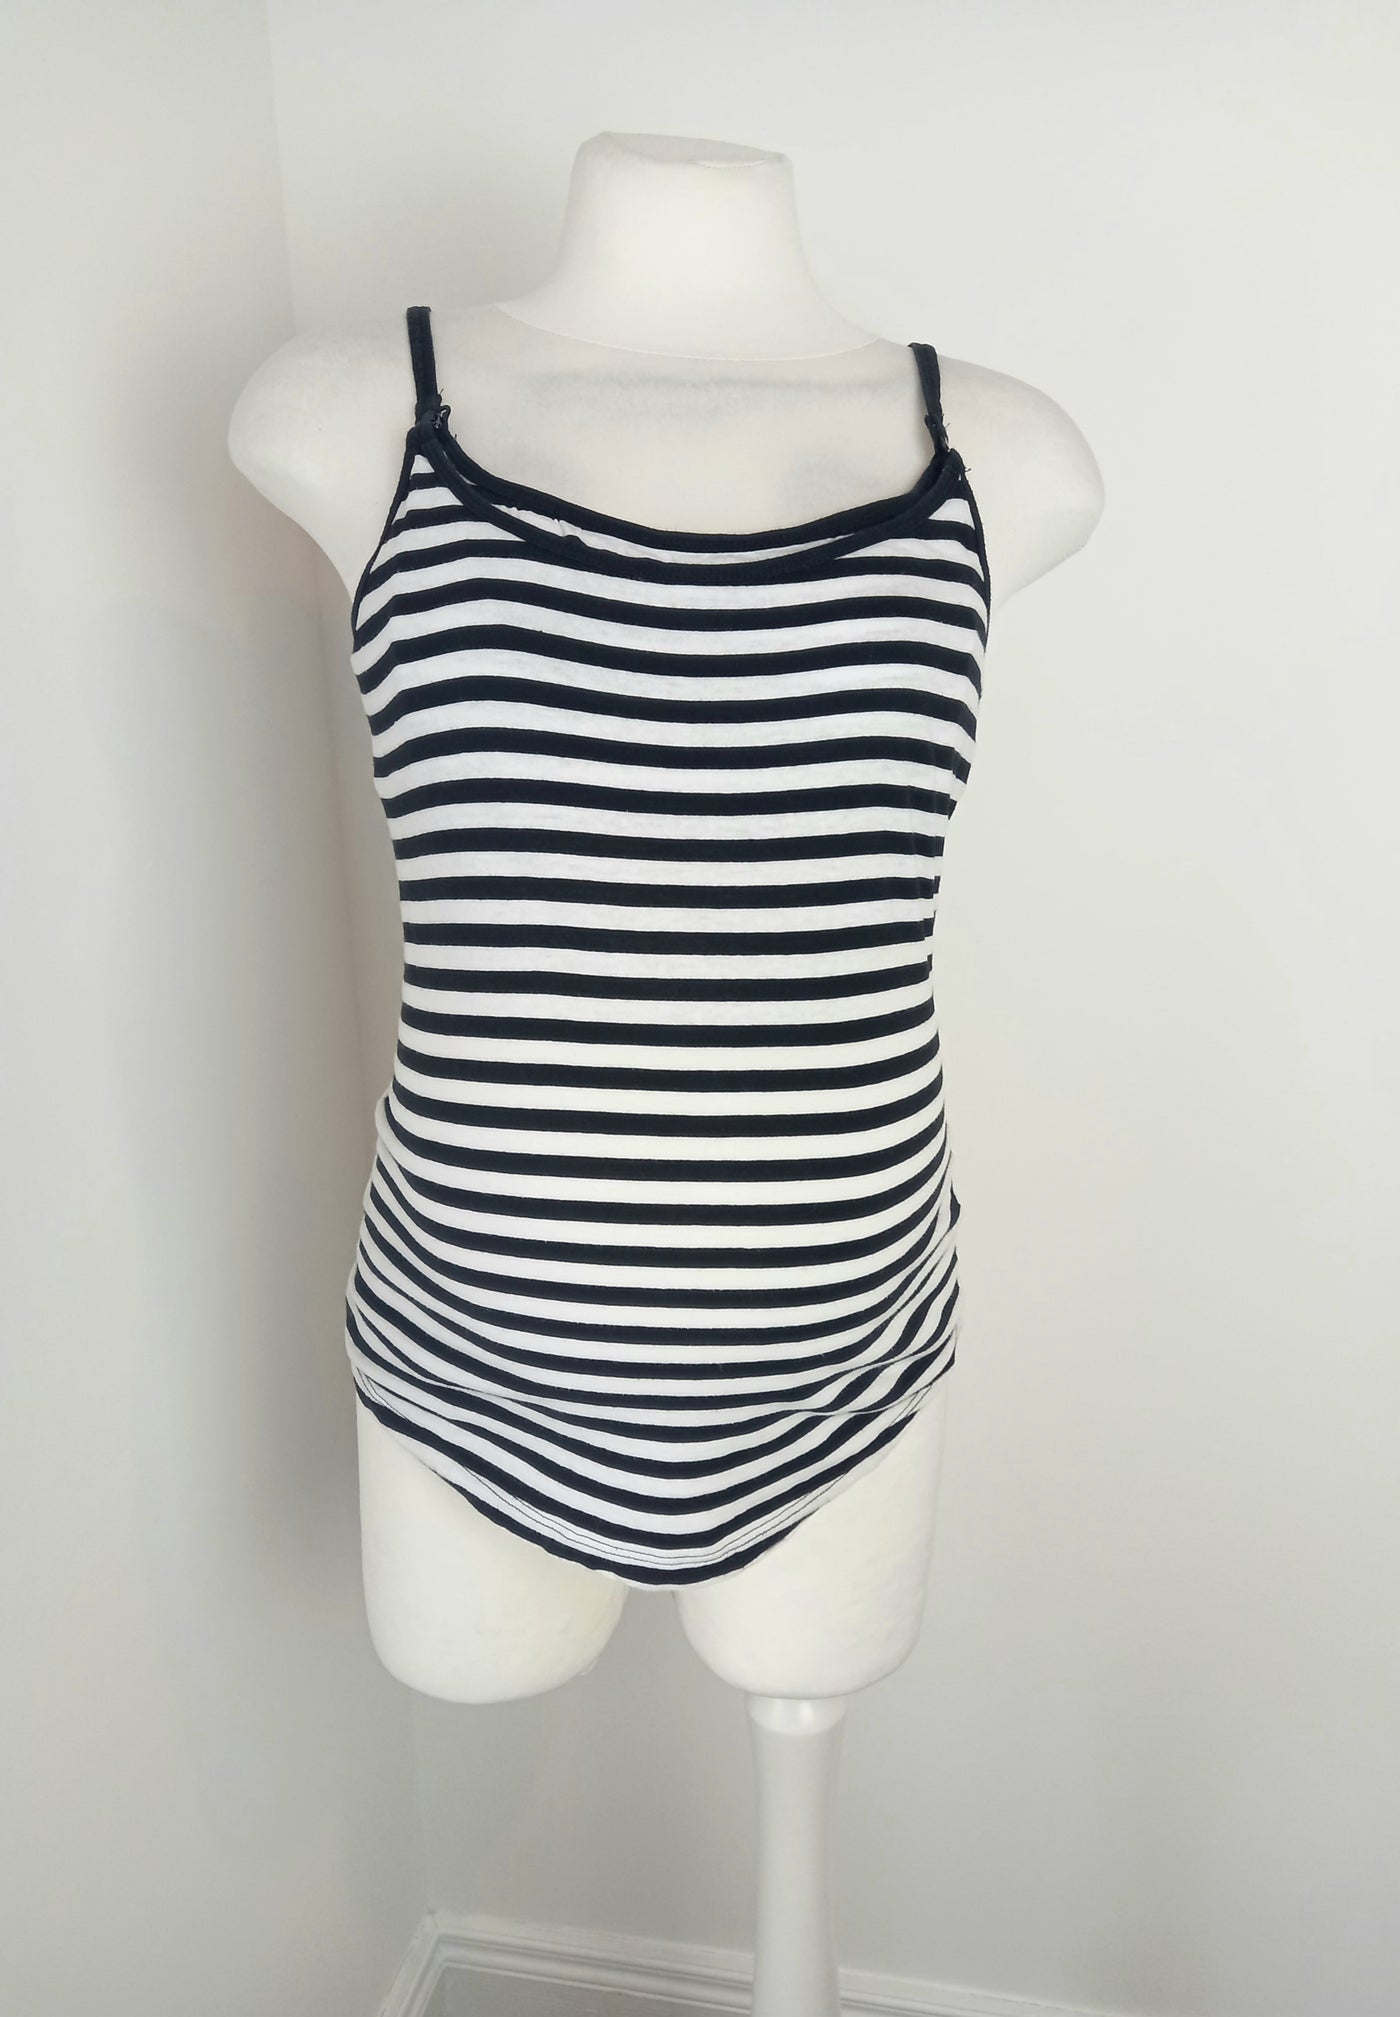 New Look Maternity black & white striped camisole nursing top - Size 12